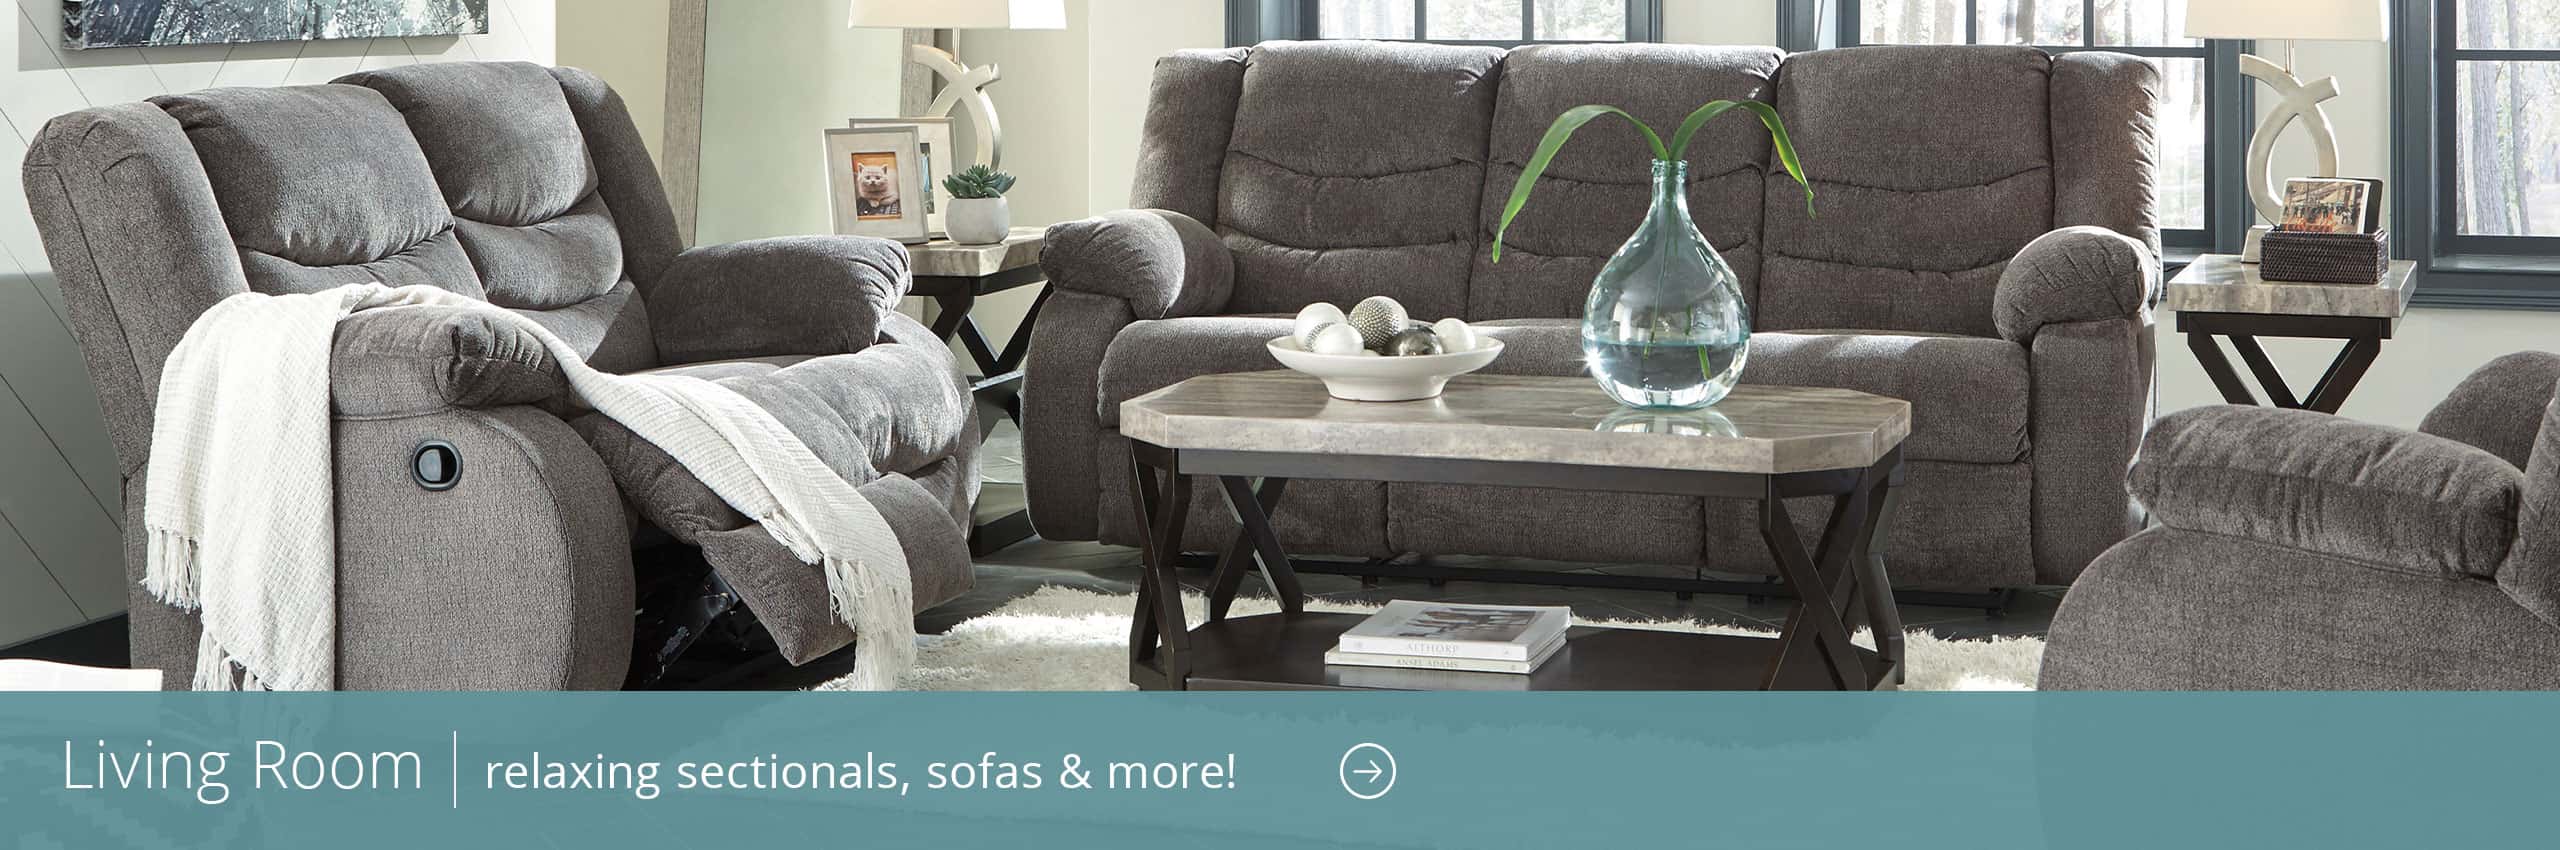 Living Room | relaxing sectionals, sofas & More >